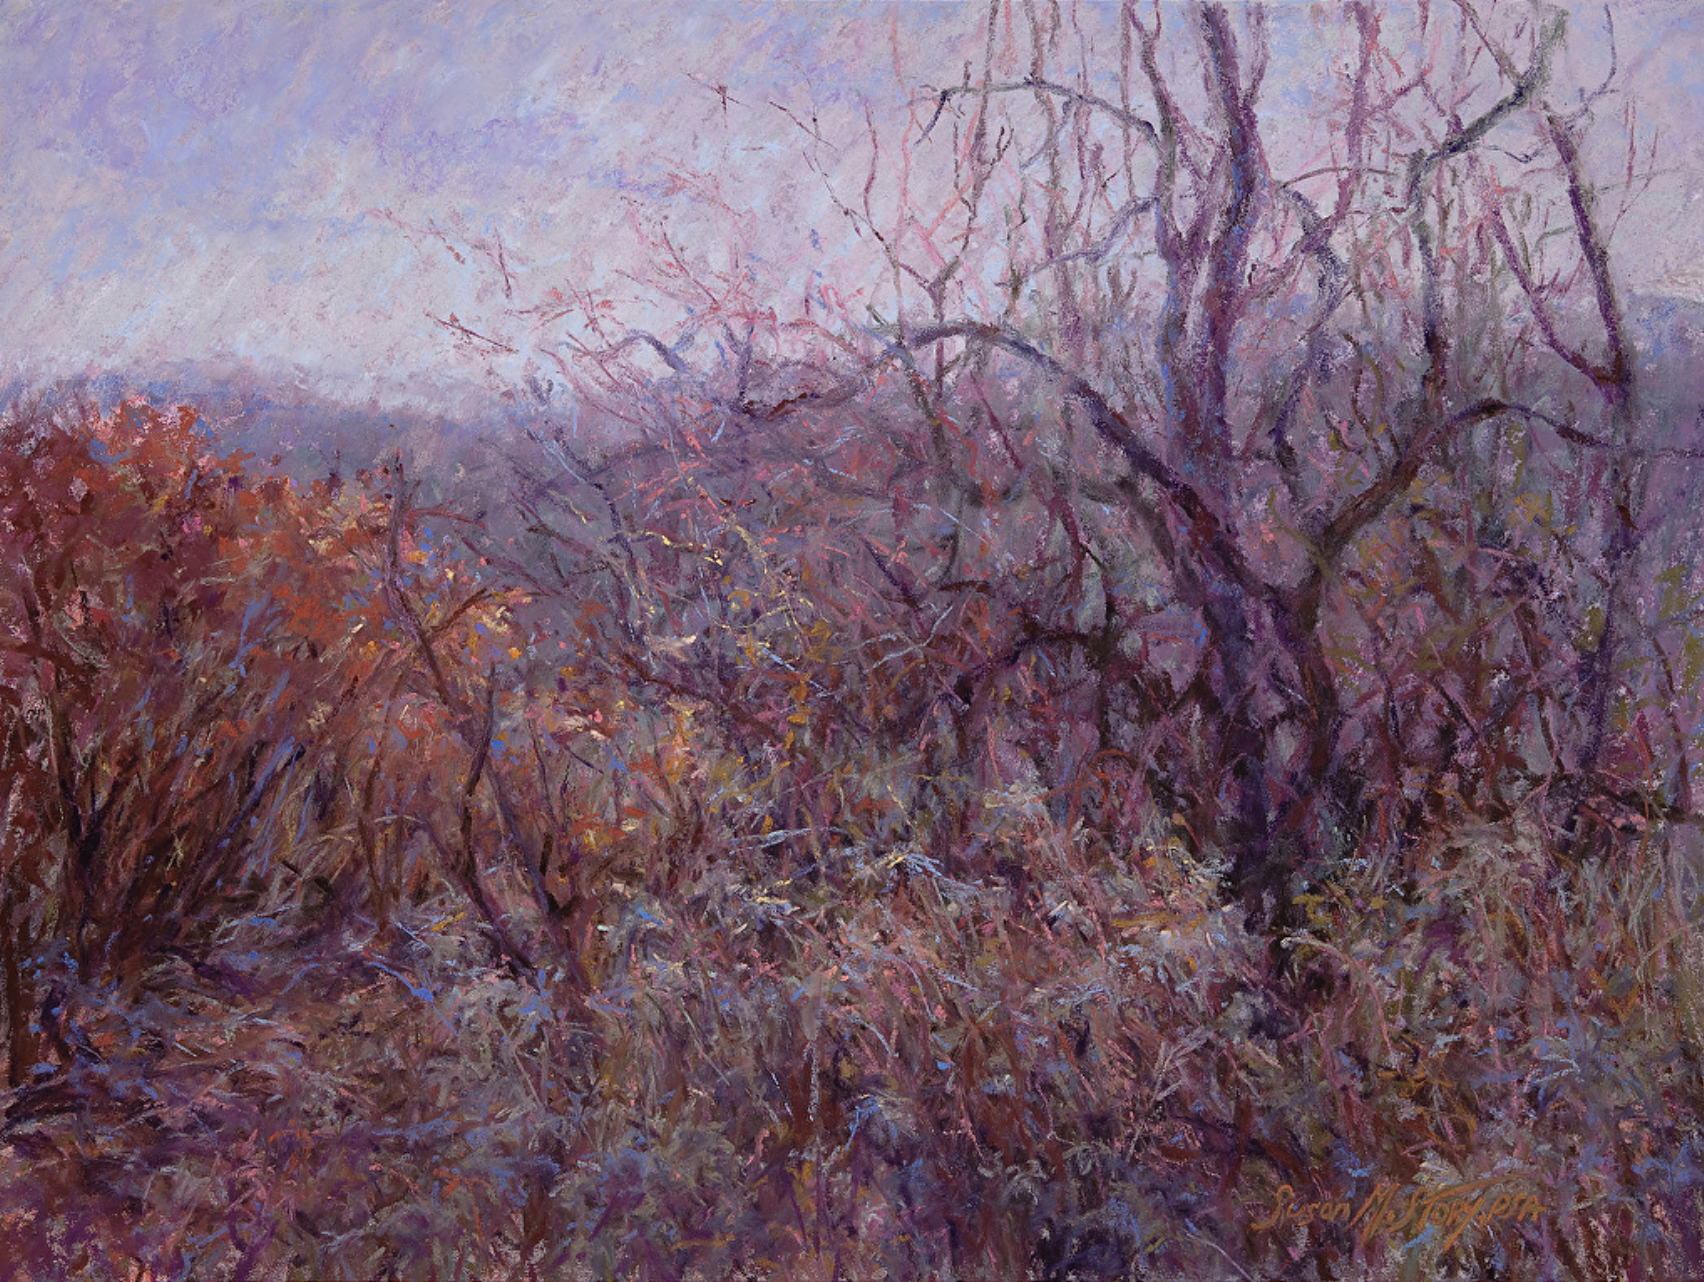 Autumn paintings - Susan M Story, "Tangled," pastel, 12 x 16 in